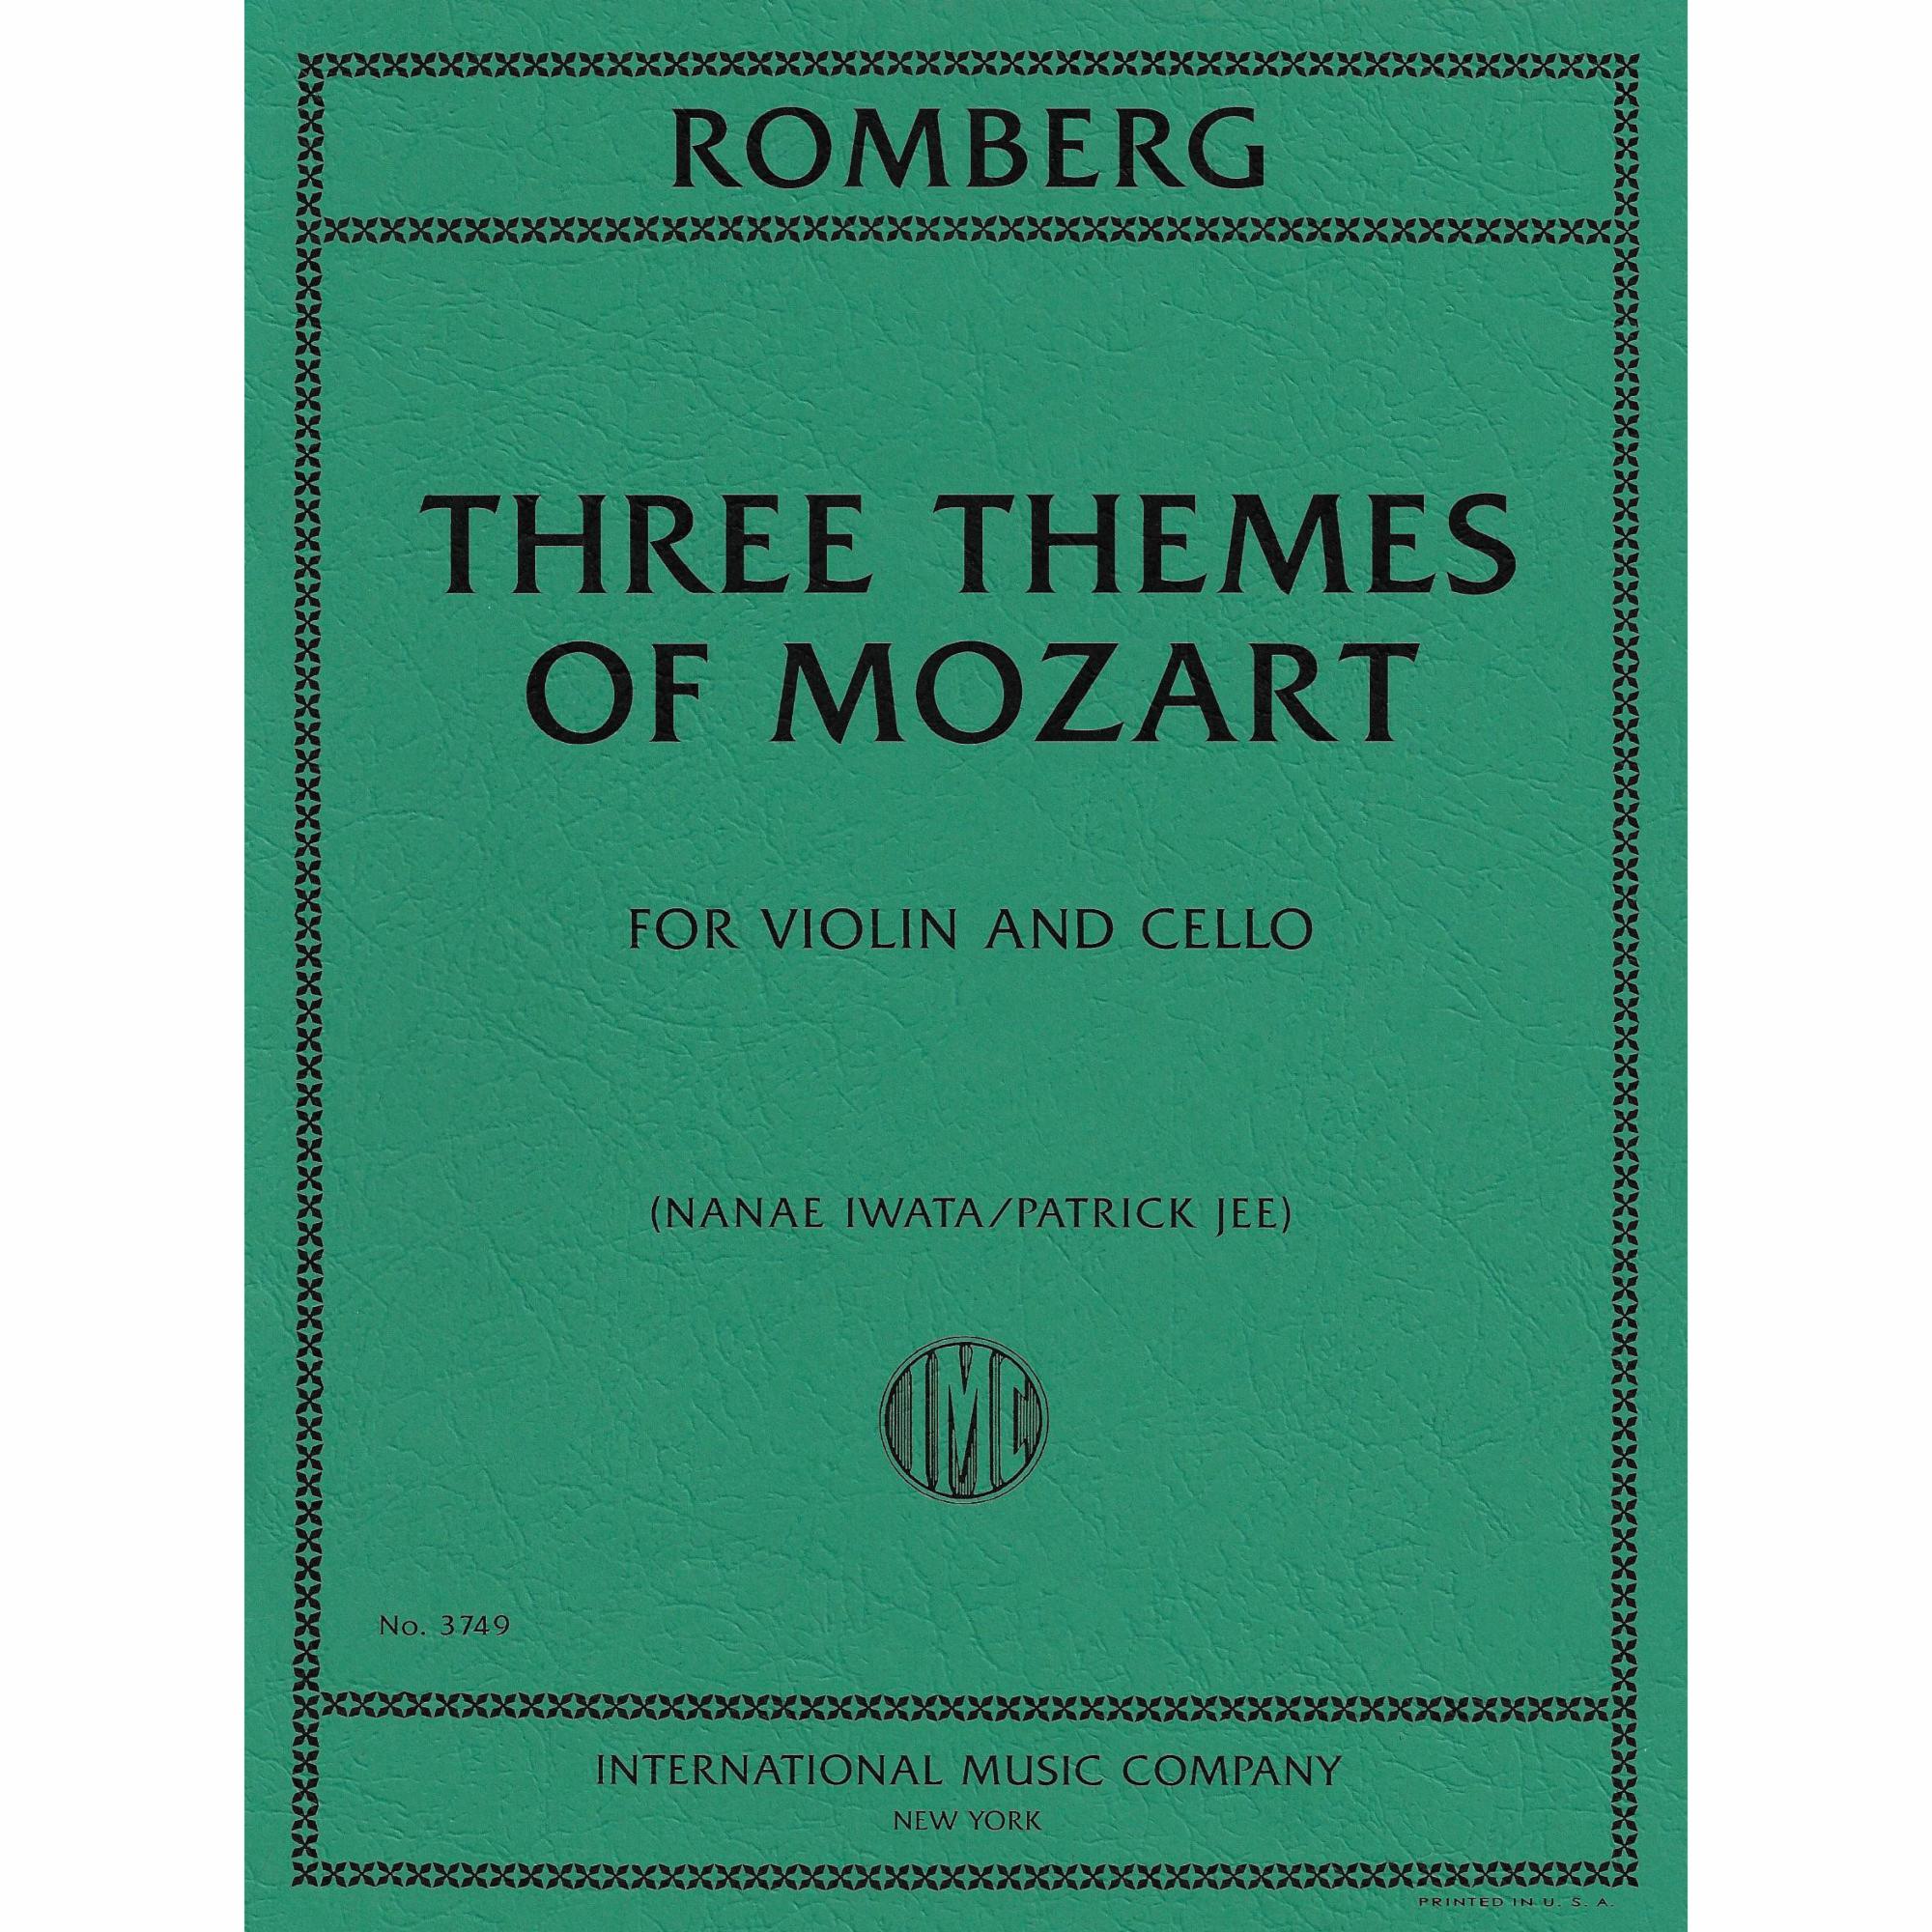 Romberg -- Three Themes of Mozart for Violin and Cello